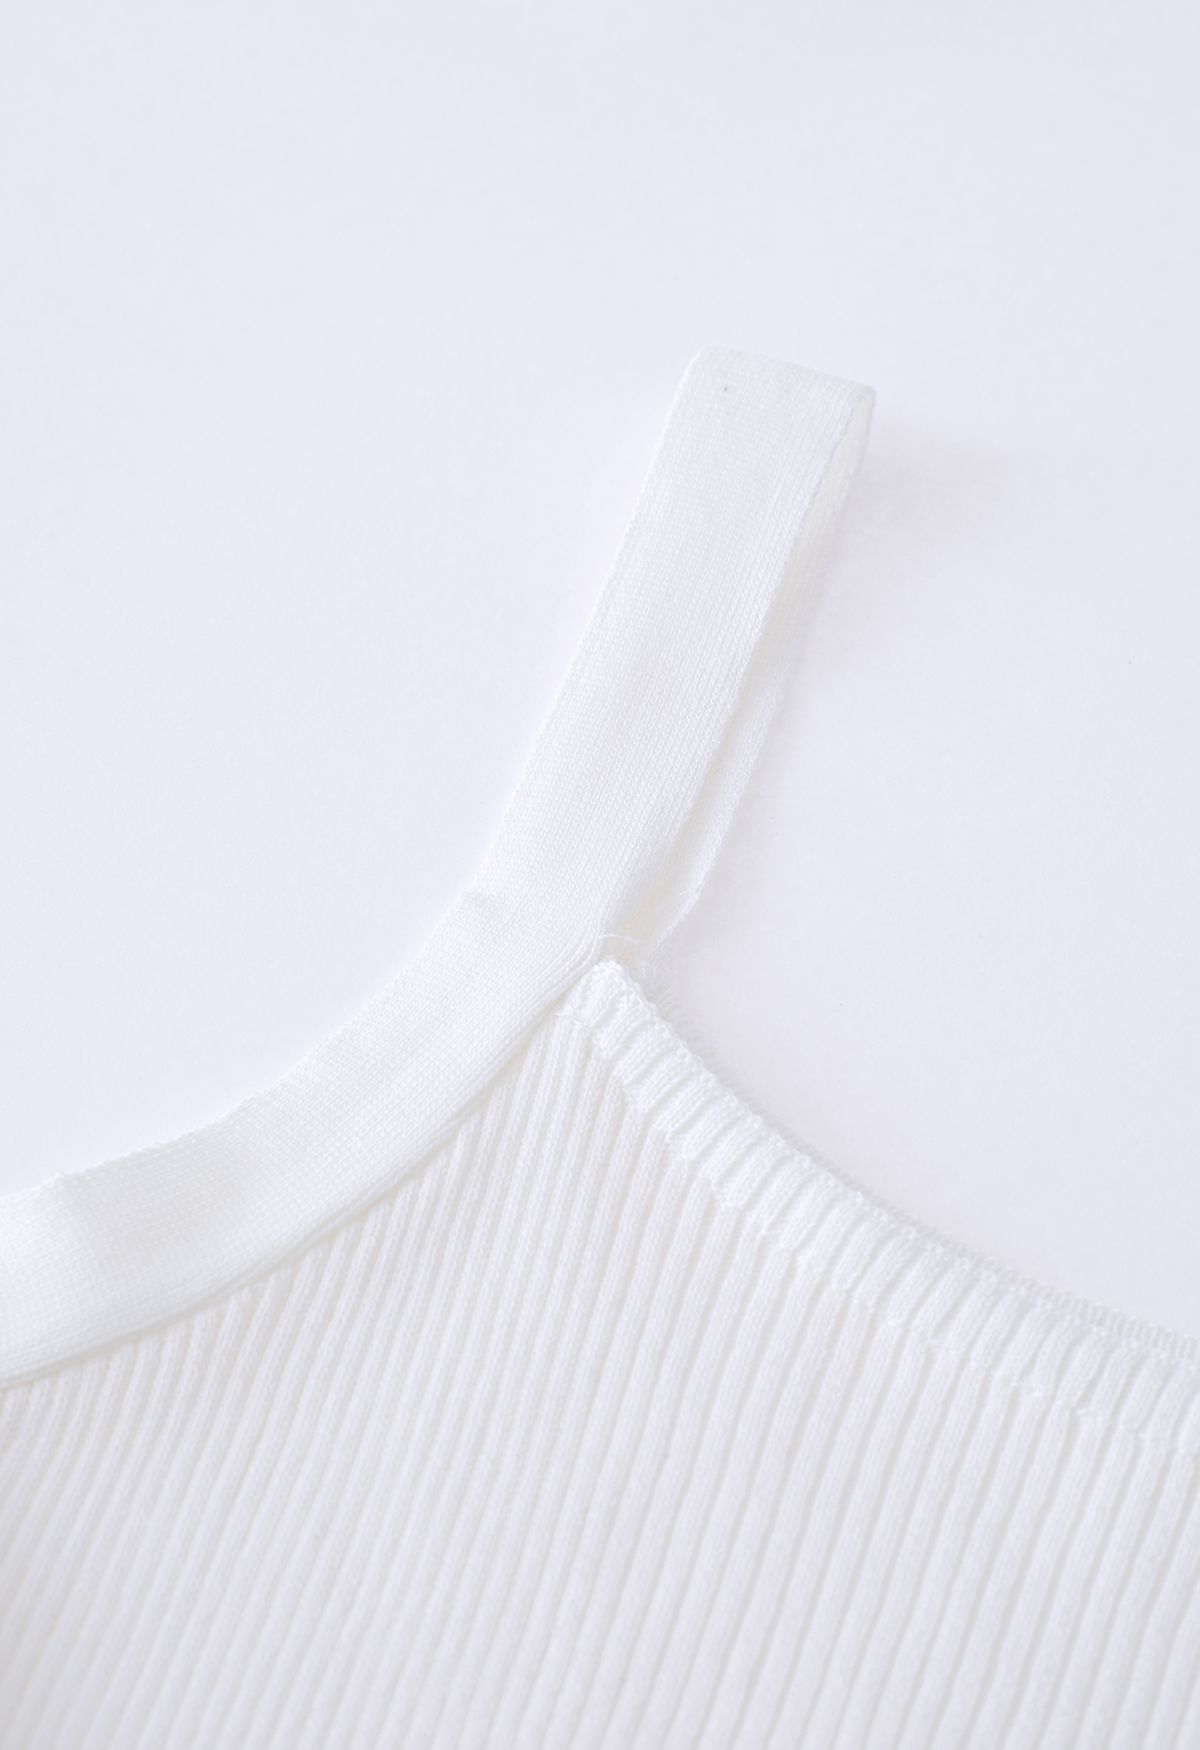 Stretchy Ribbed Knit Cami Top in White